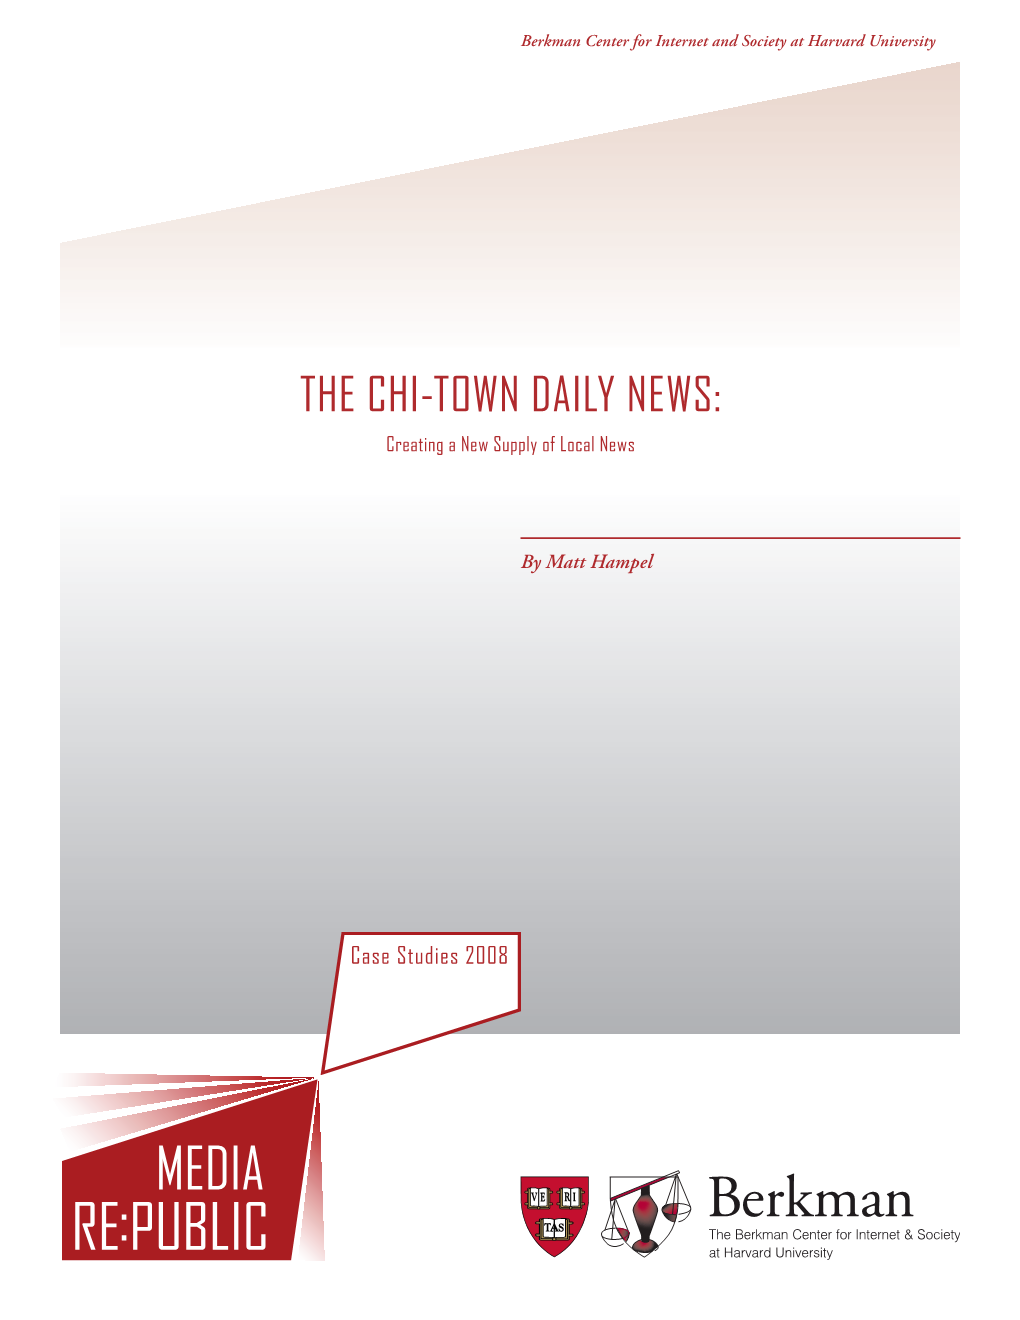 The Chi-Town Daily News: Creating a New Supply of Local News